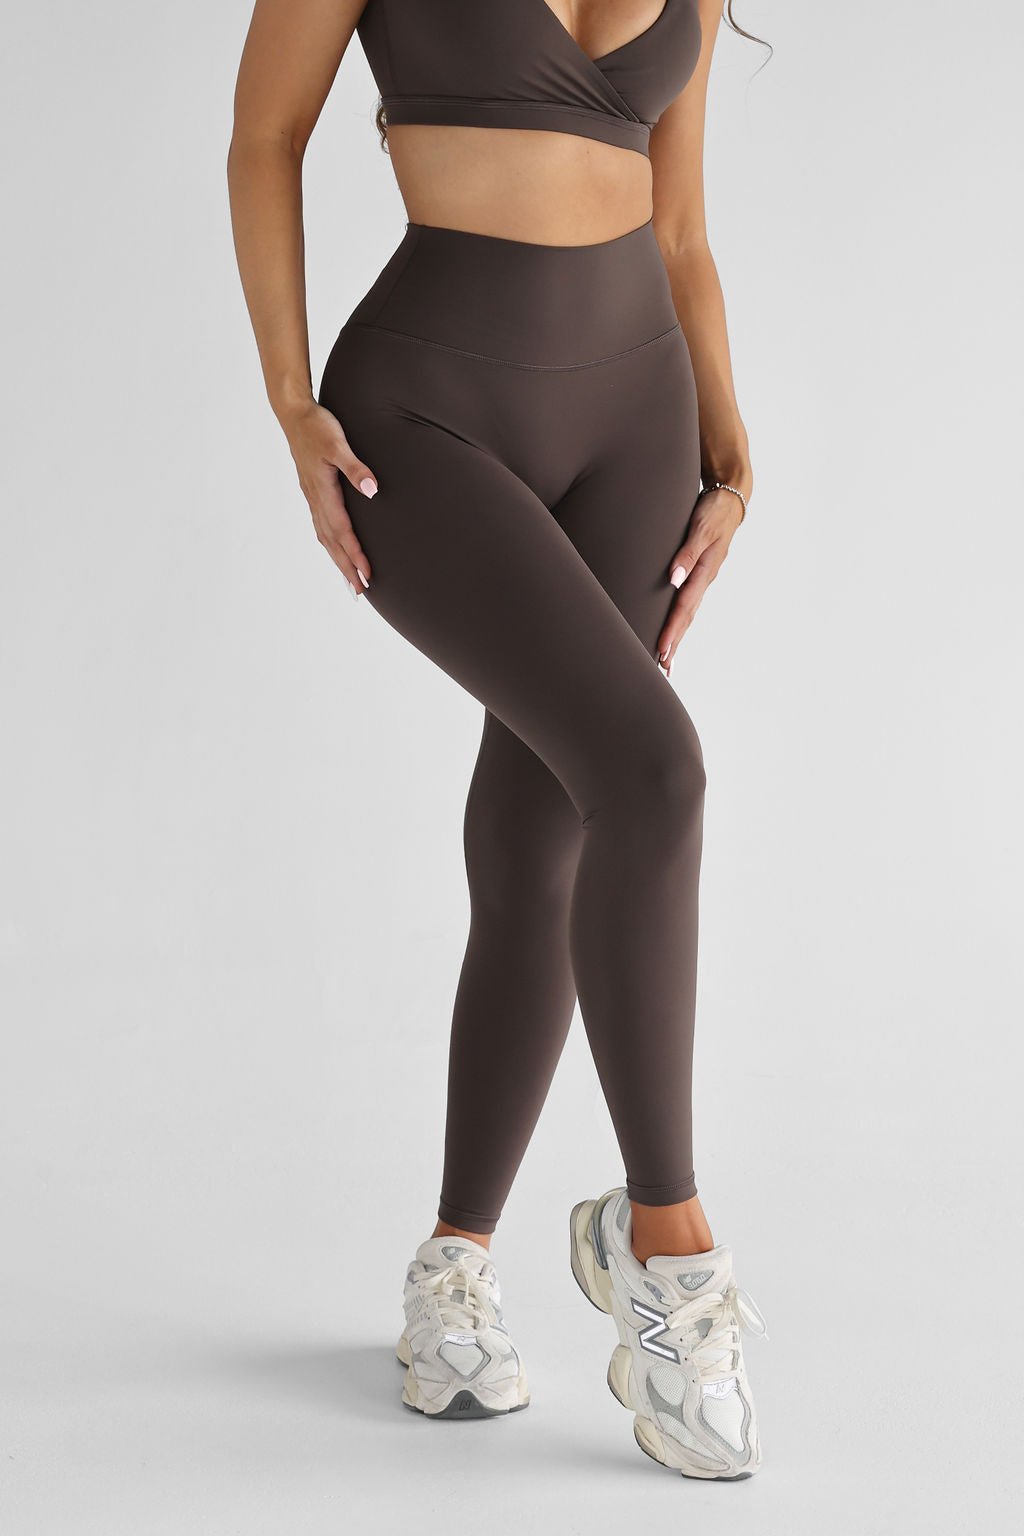 Change Full Length Leggings with Pockets in Chocolate